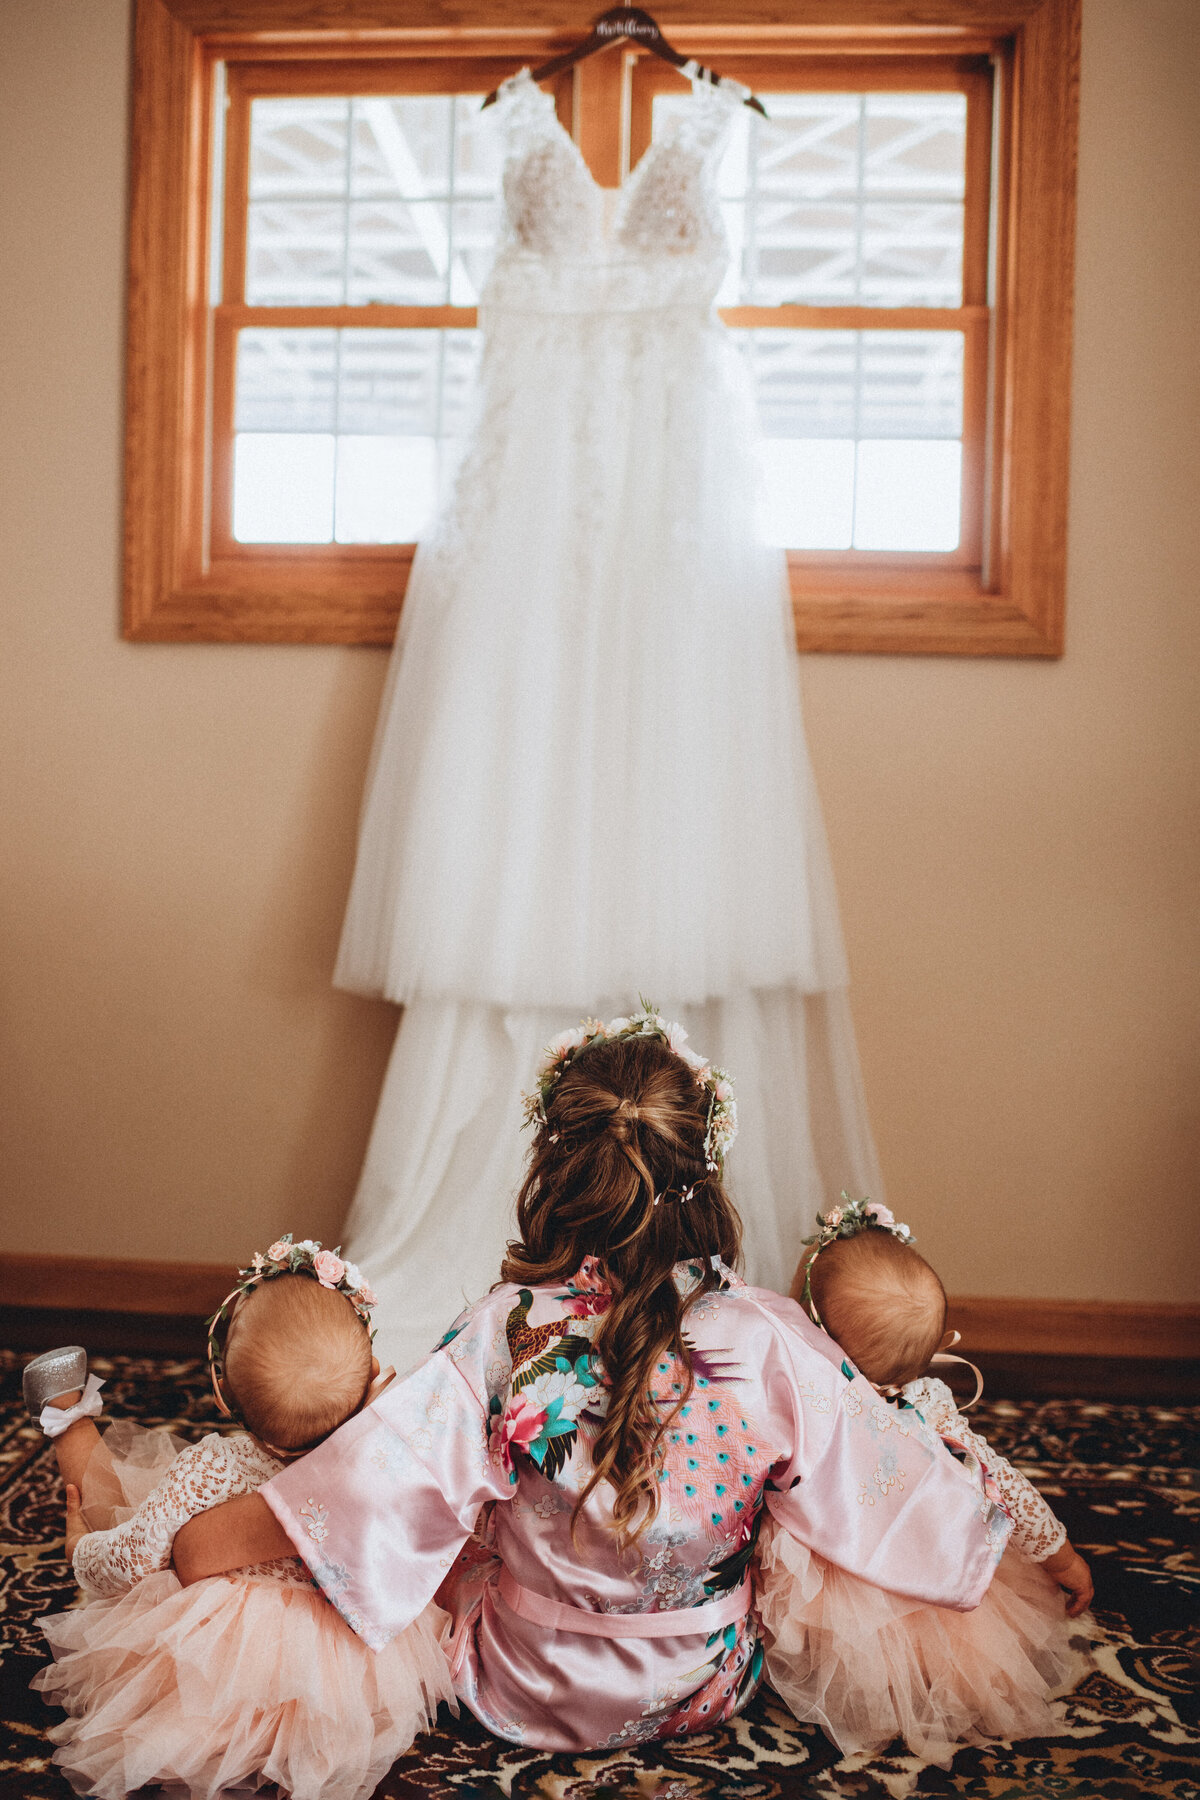 Three little girls sitting and looking up at wedding dress